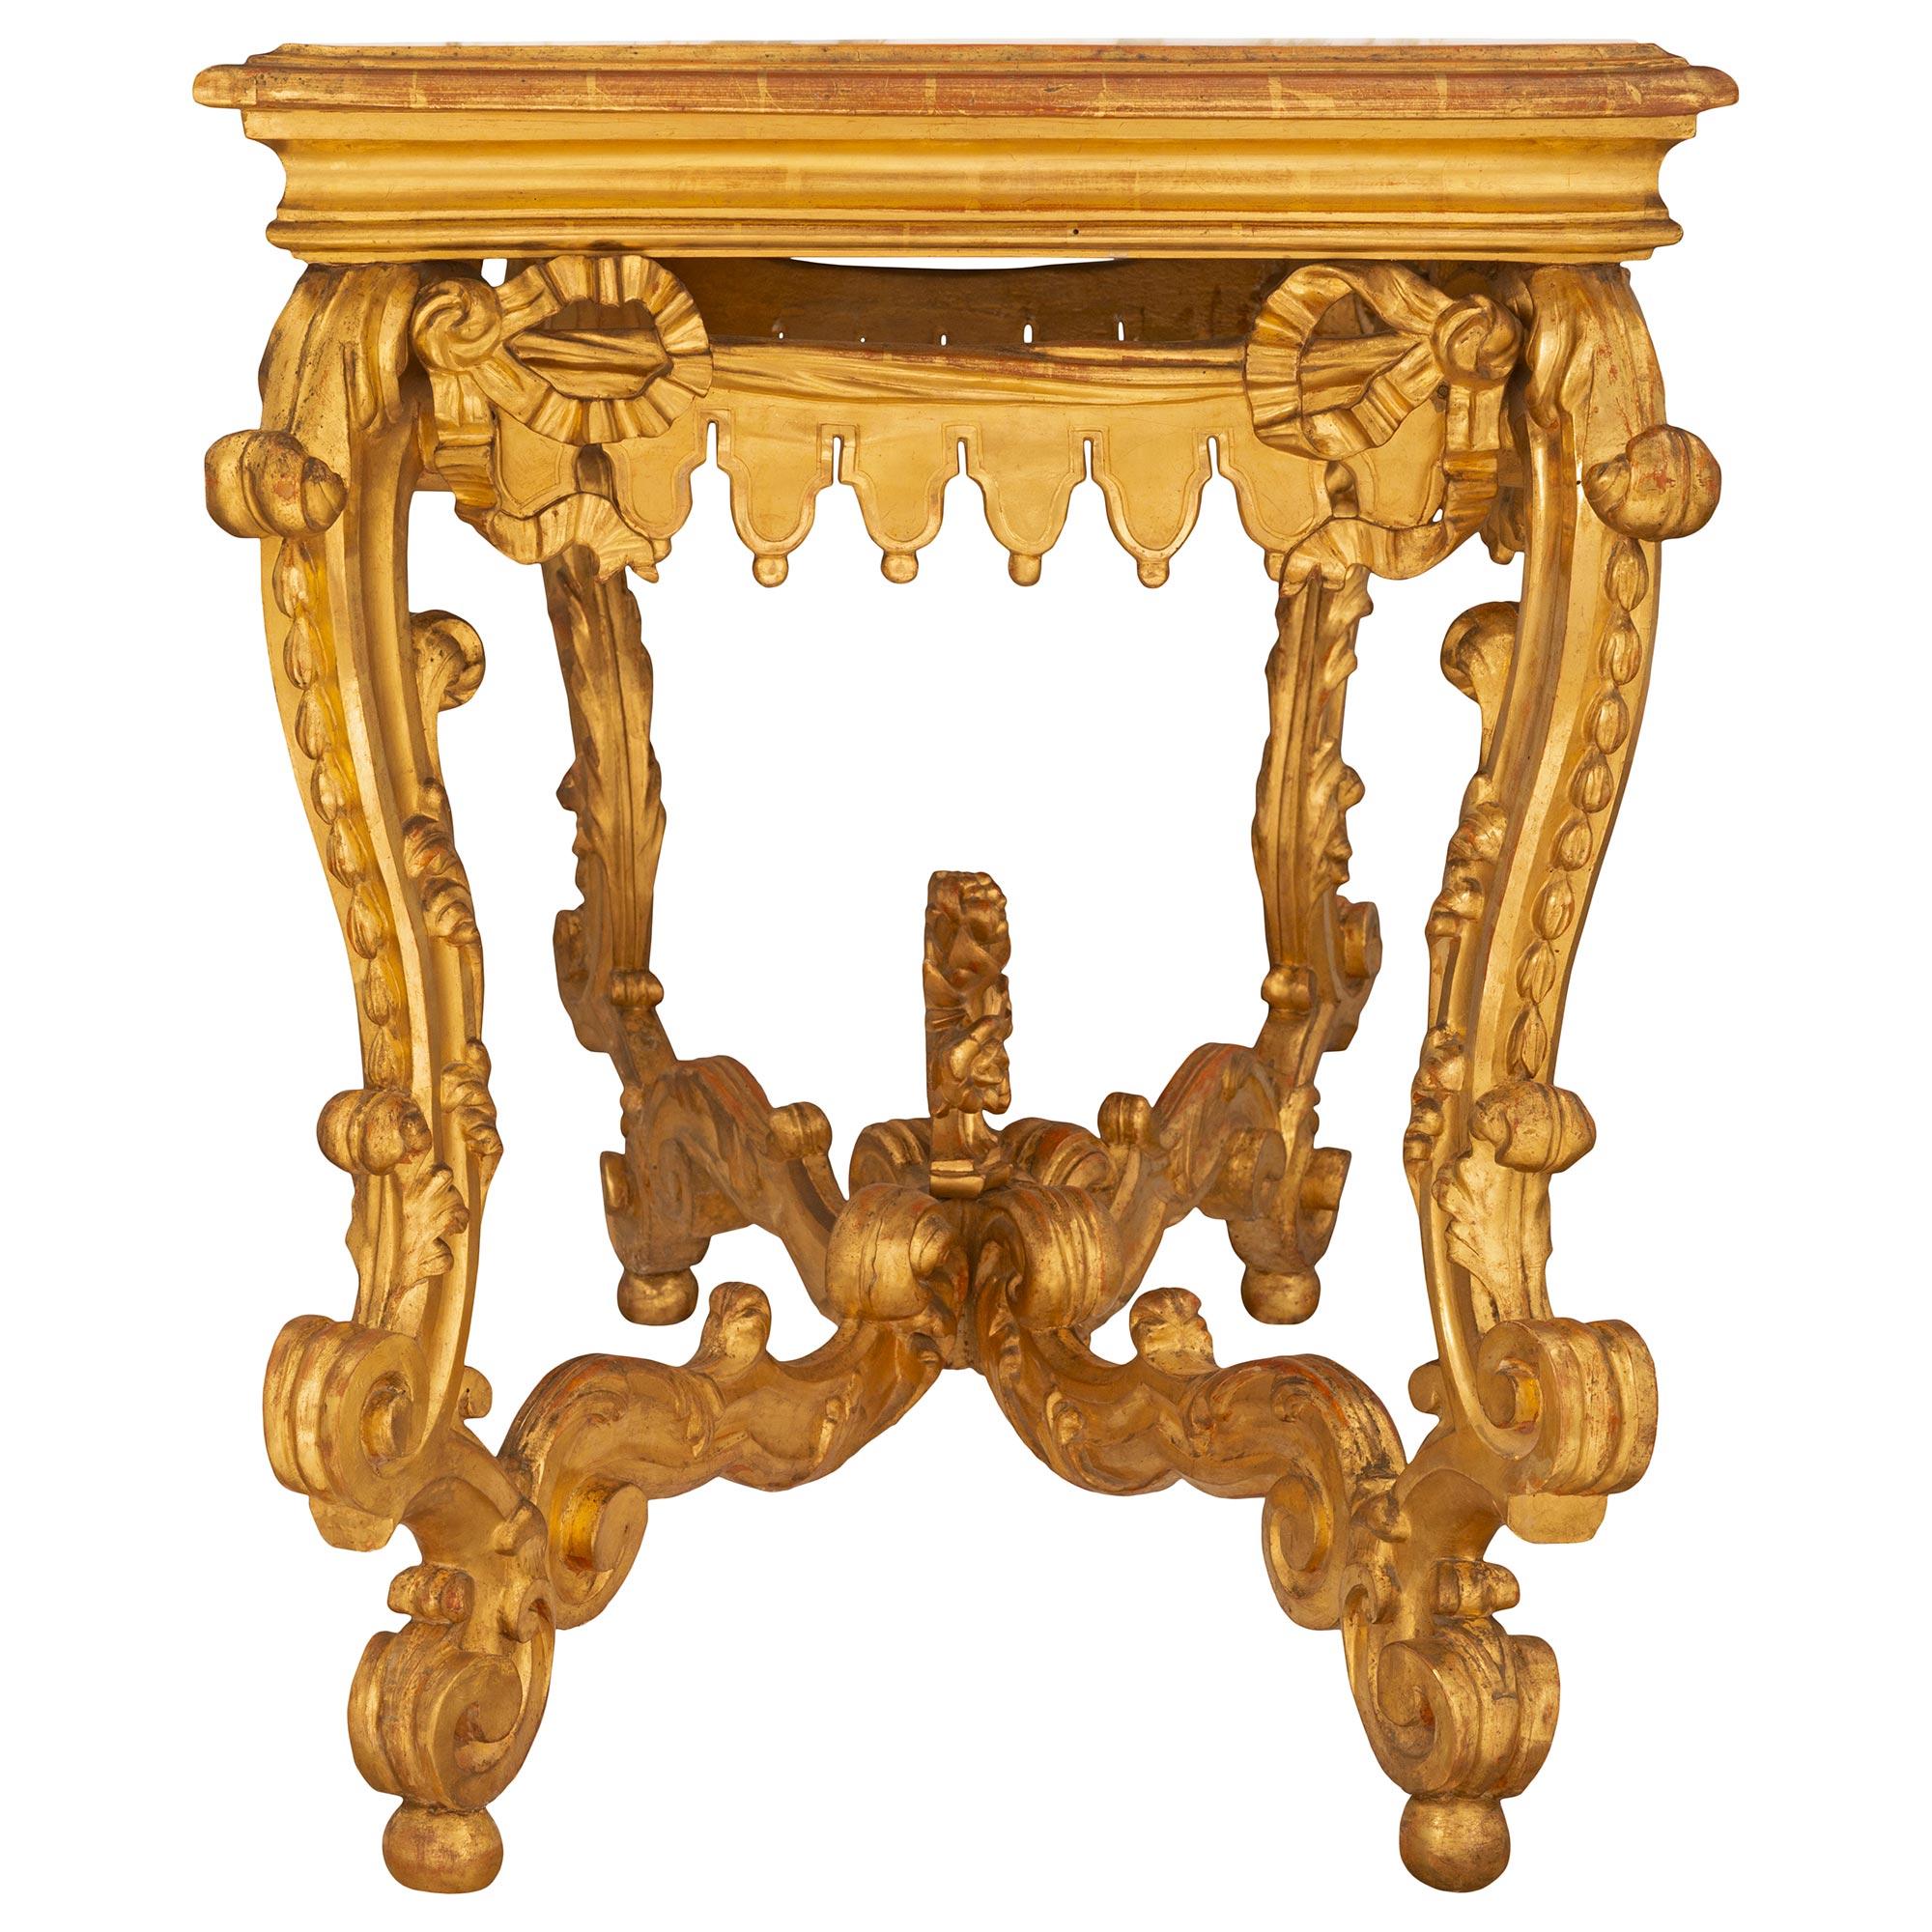 Italian Mid-19th Century Venetian Giltwood and Marble Freestanding Console For Sale 1